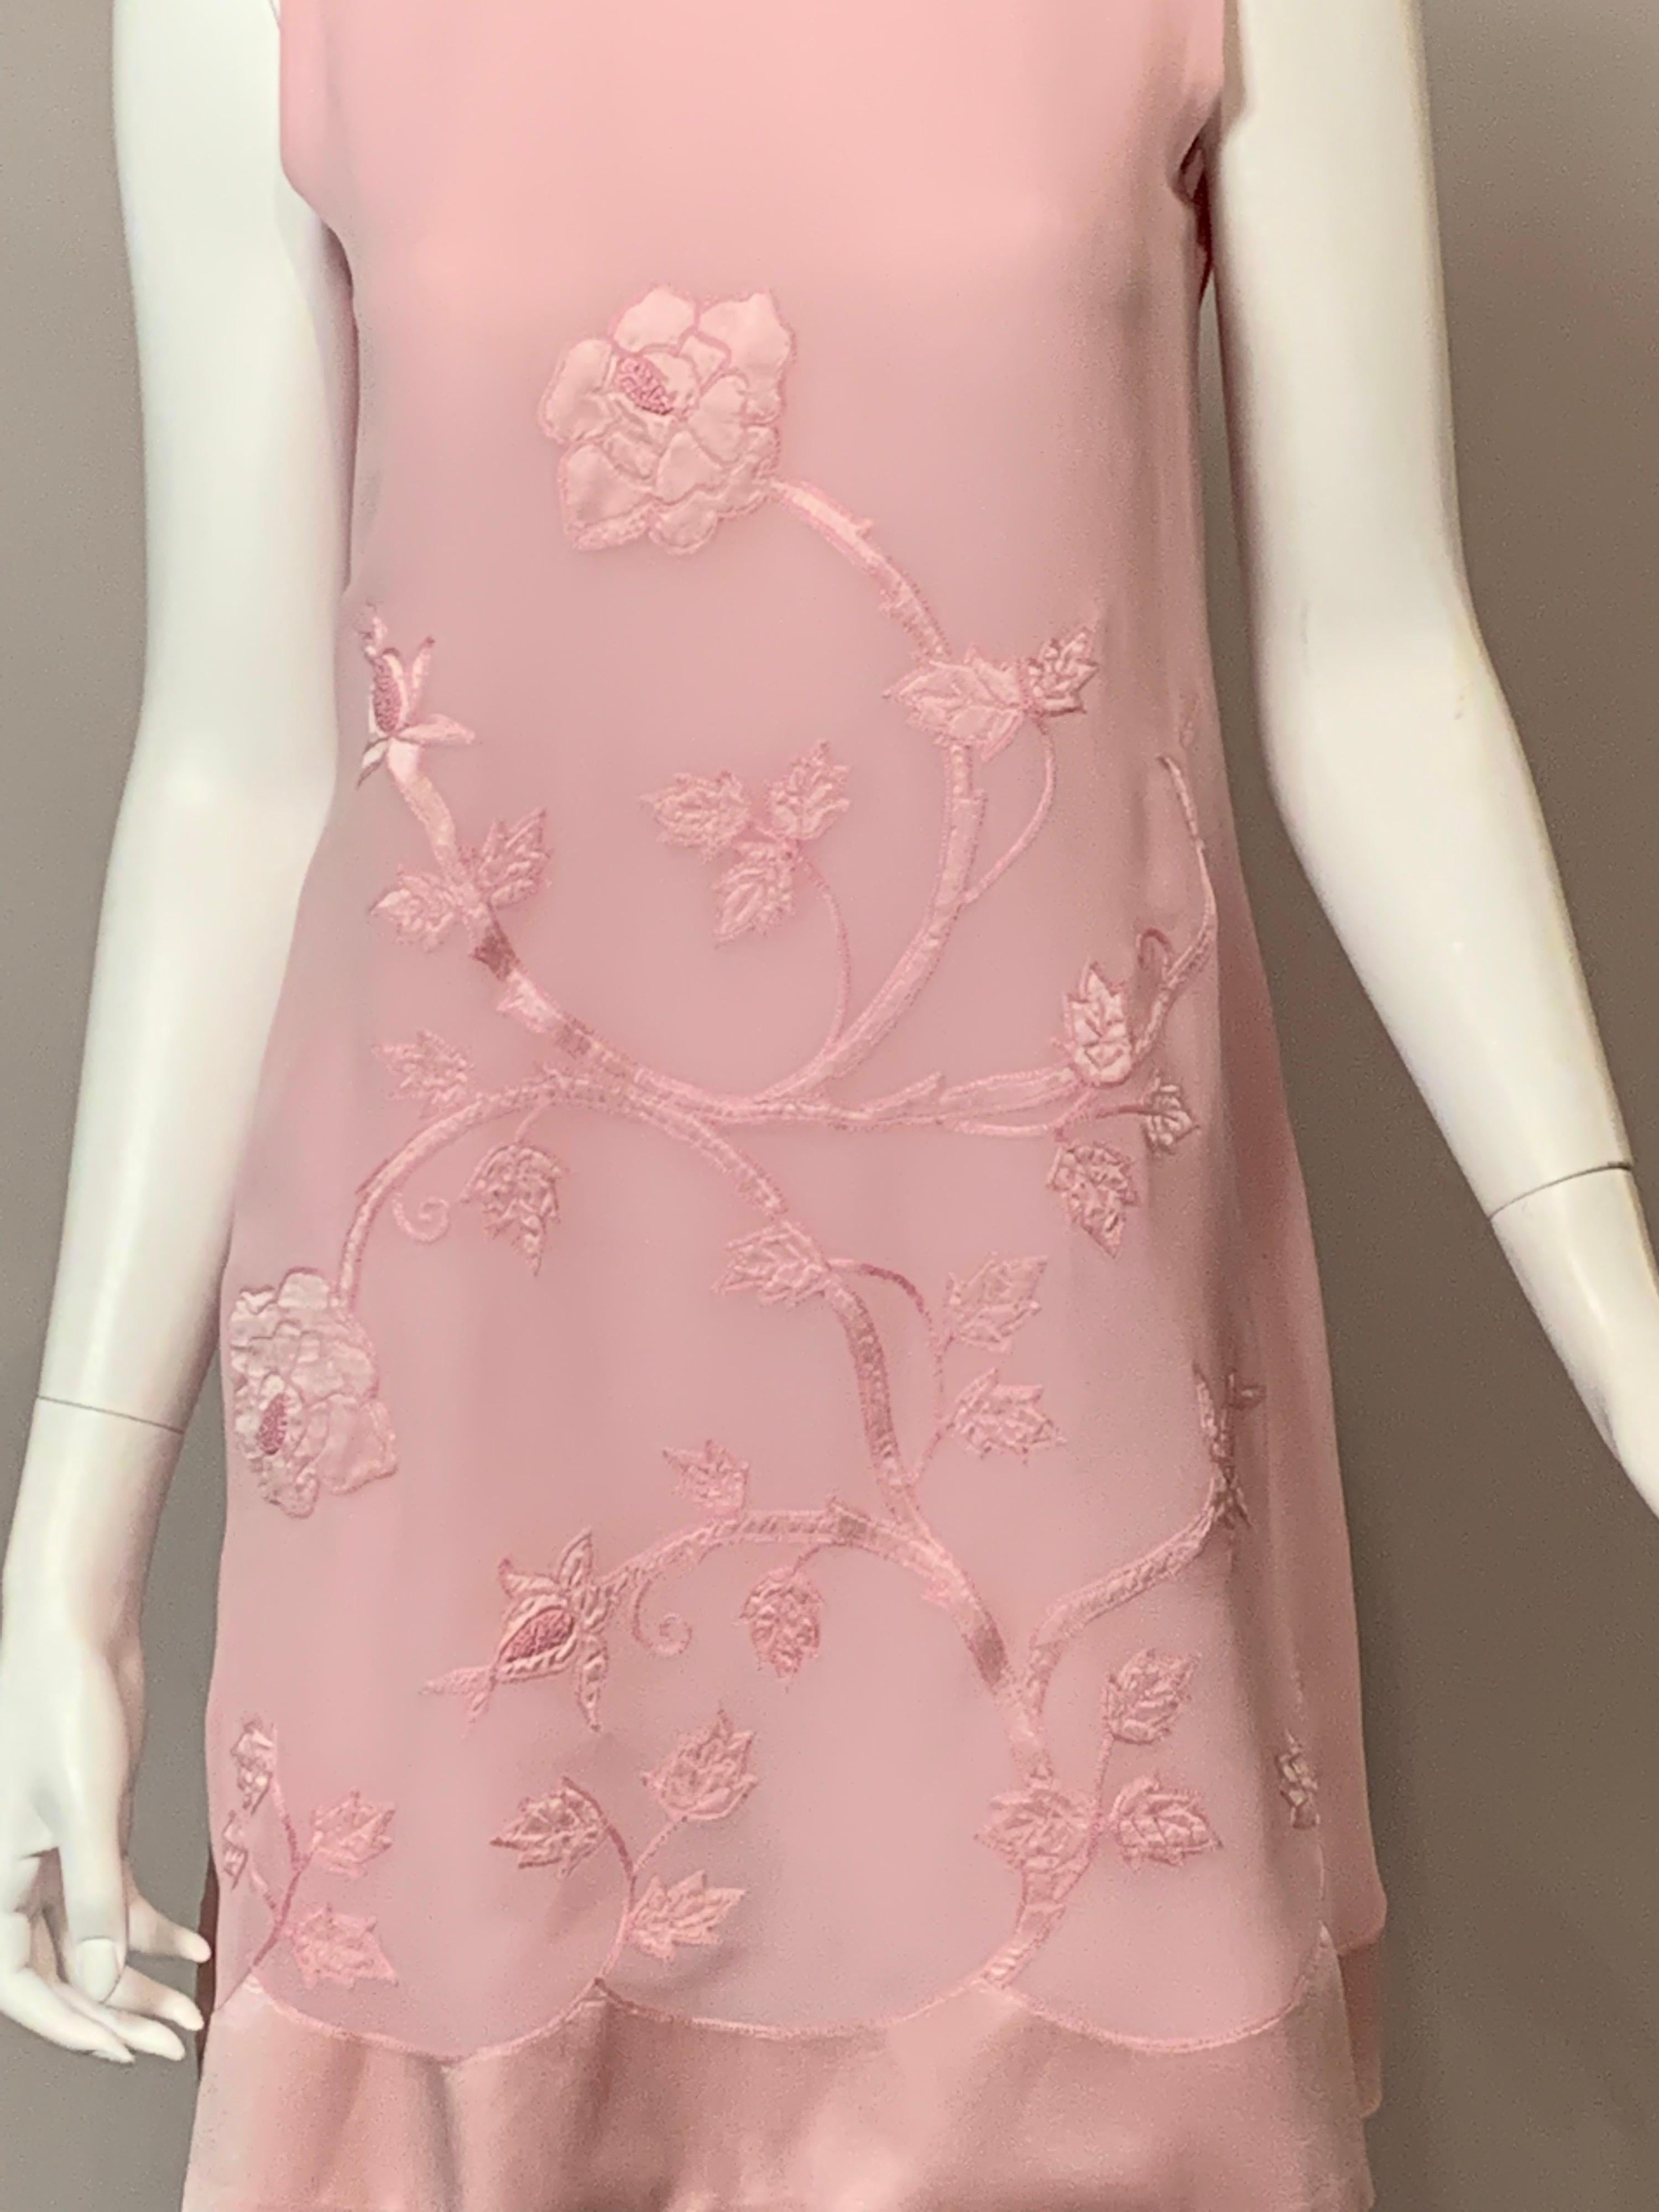 Alberta Ferretti Pink Silk Chiffon Floral Lingerie Dress Appliqued Satin Flowers In Excellent Condition For Sale In New Hope, PA